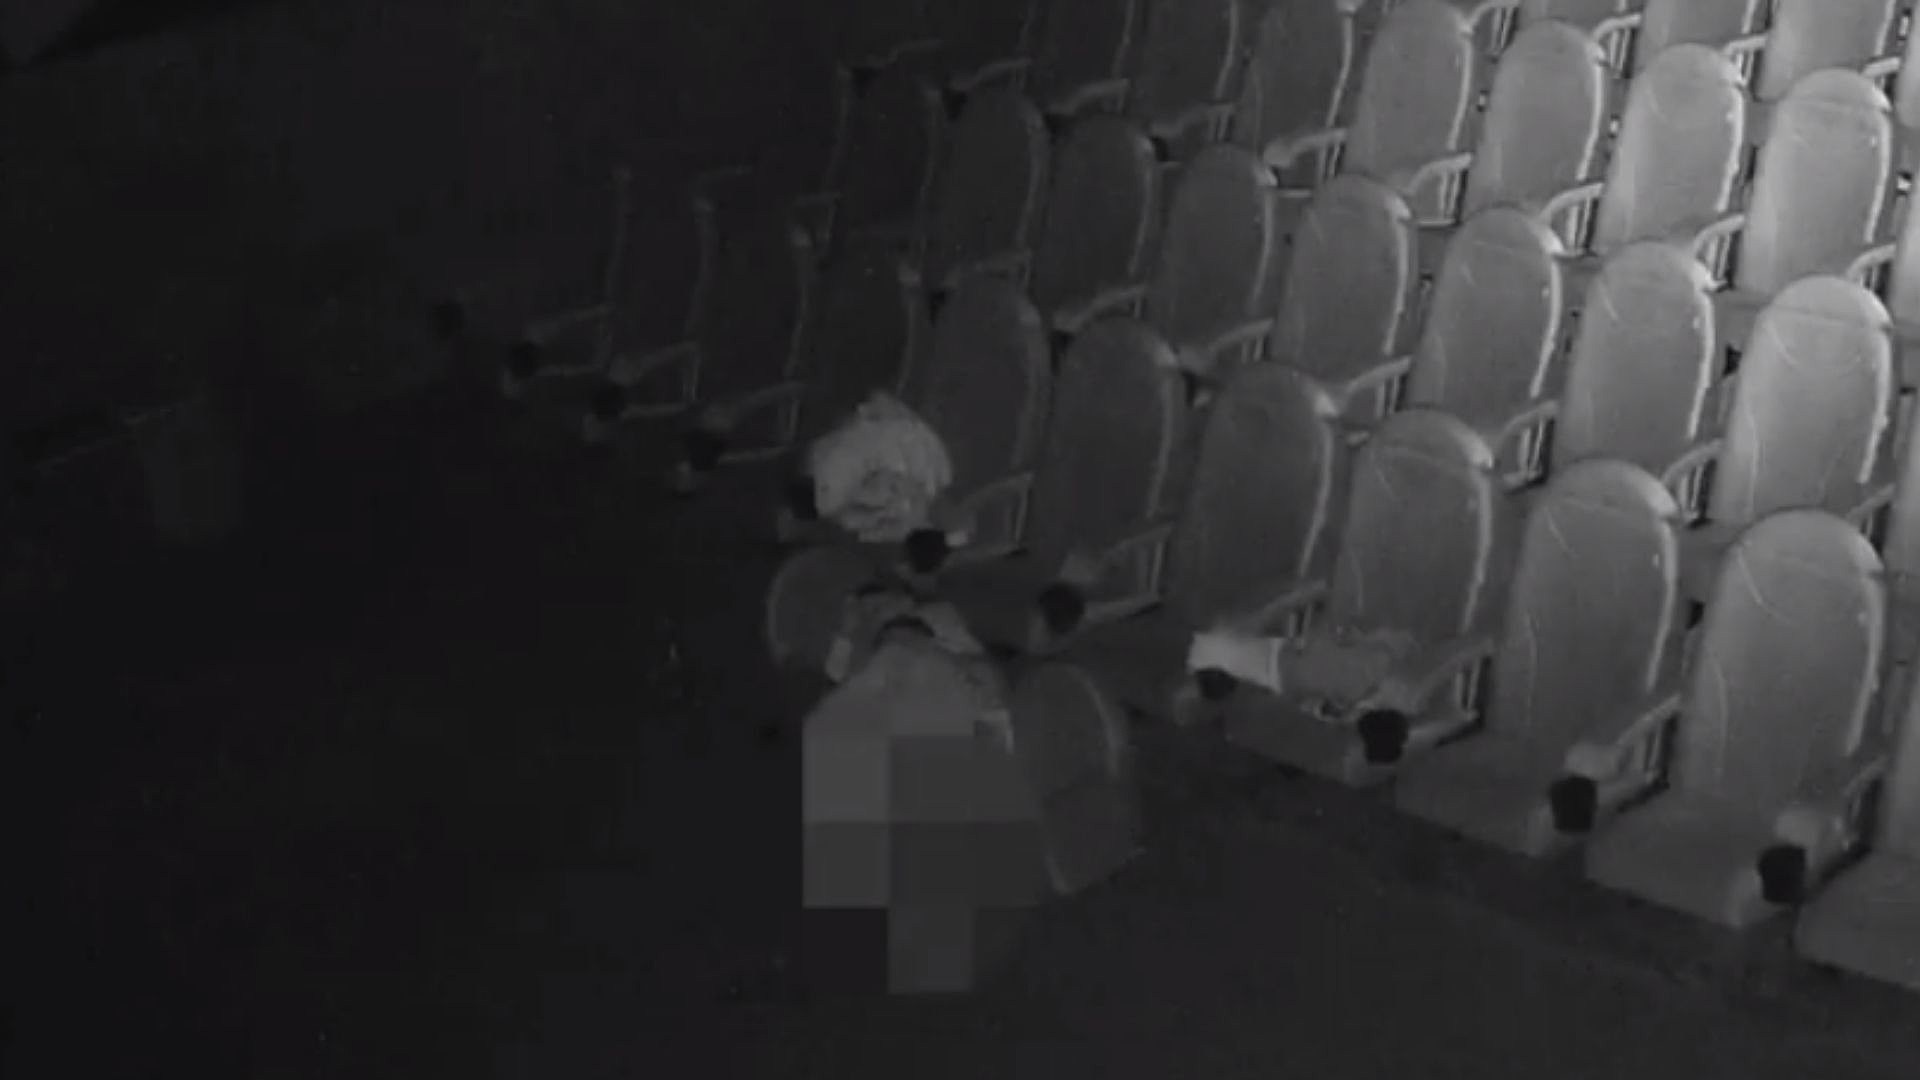 Couple Caught on Camera Having Steamy Night in Closed Theater pic